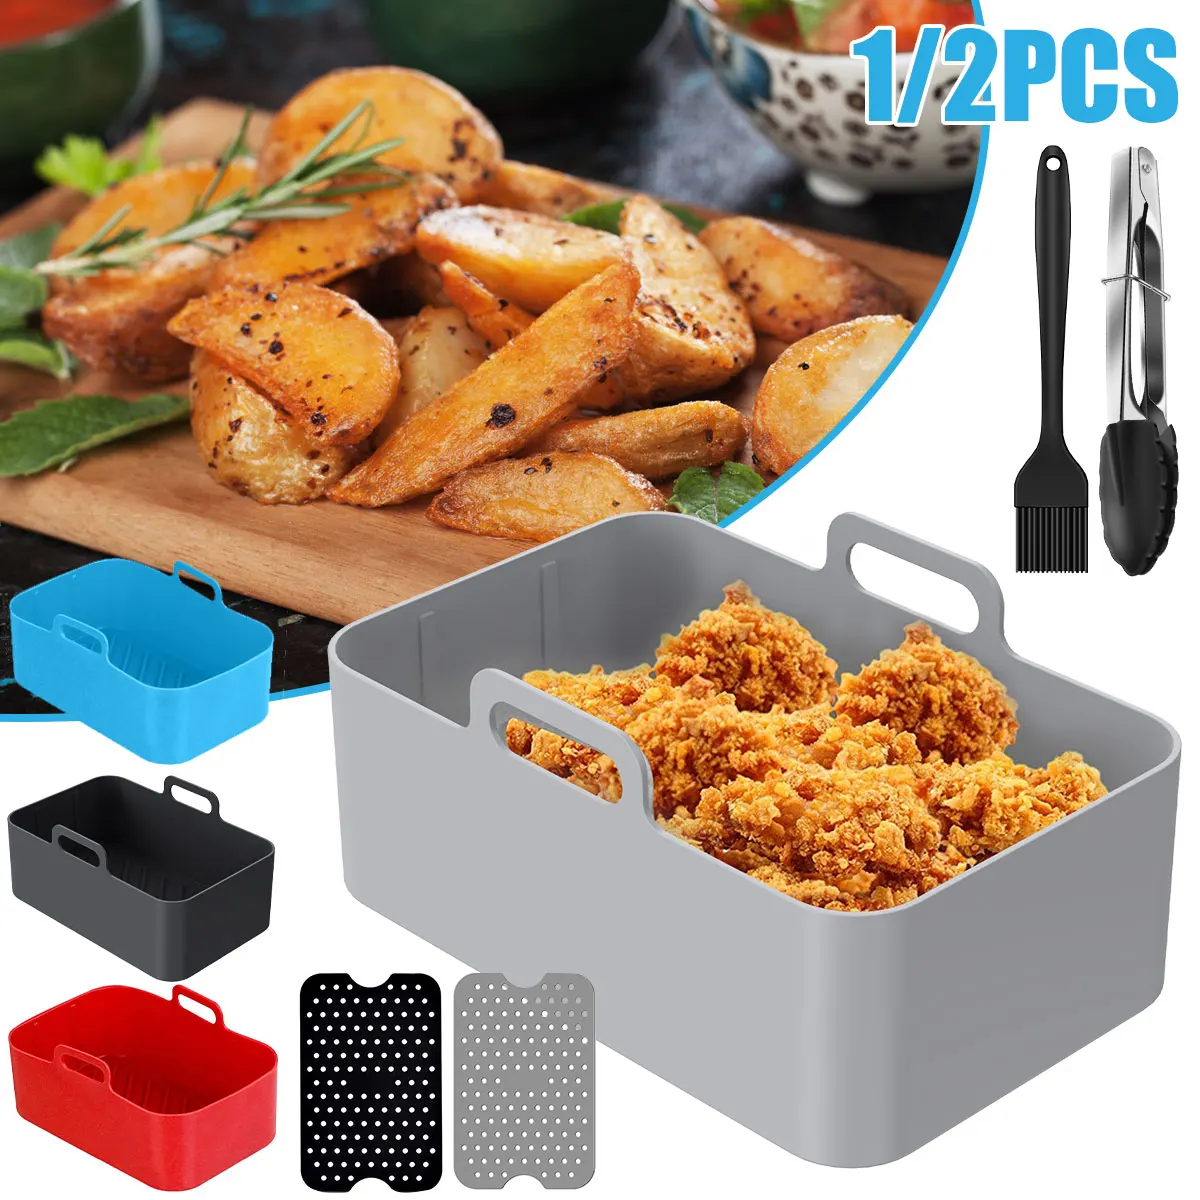 

Reusable Silicone Air Fryer Liner Basket Square Air Fryer Pot Tray Heat Resistant Food Baking for AirFryer Chicken Accessories